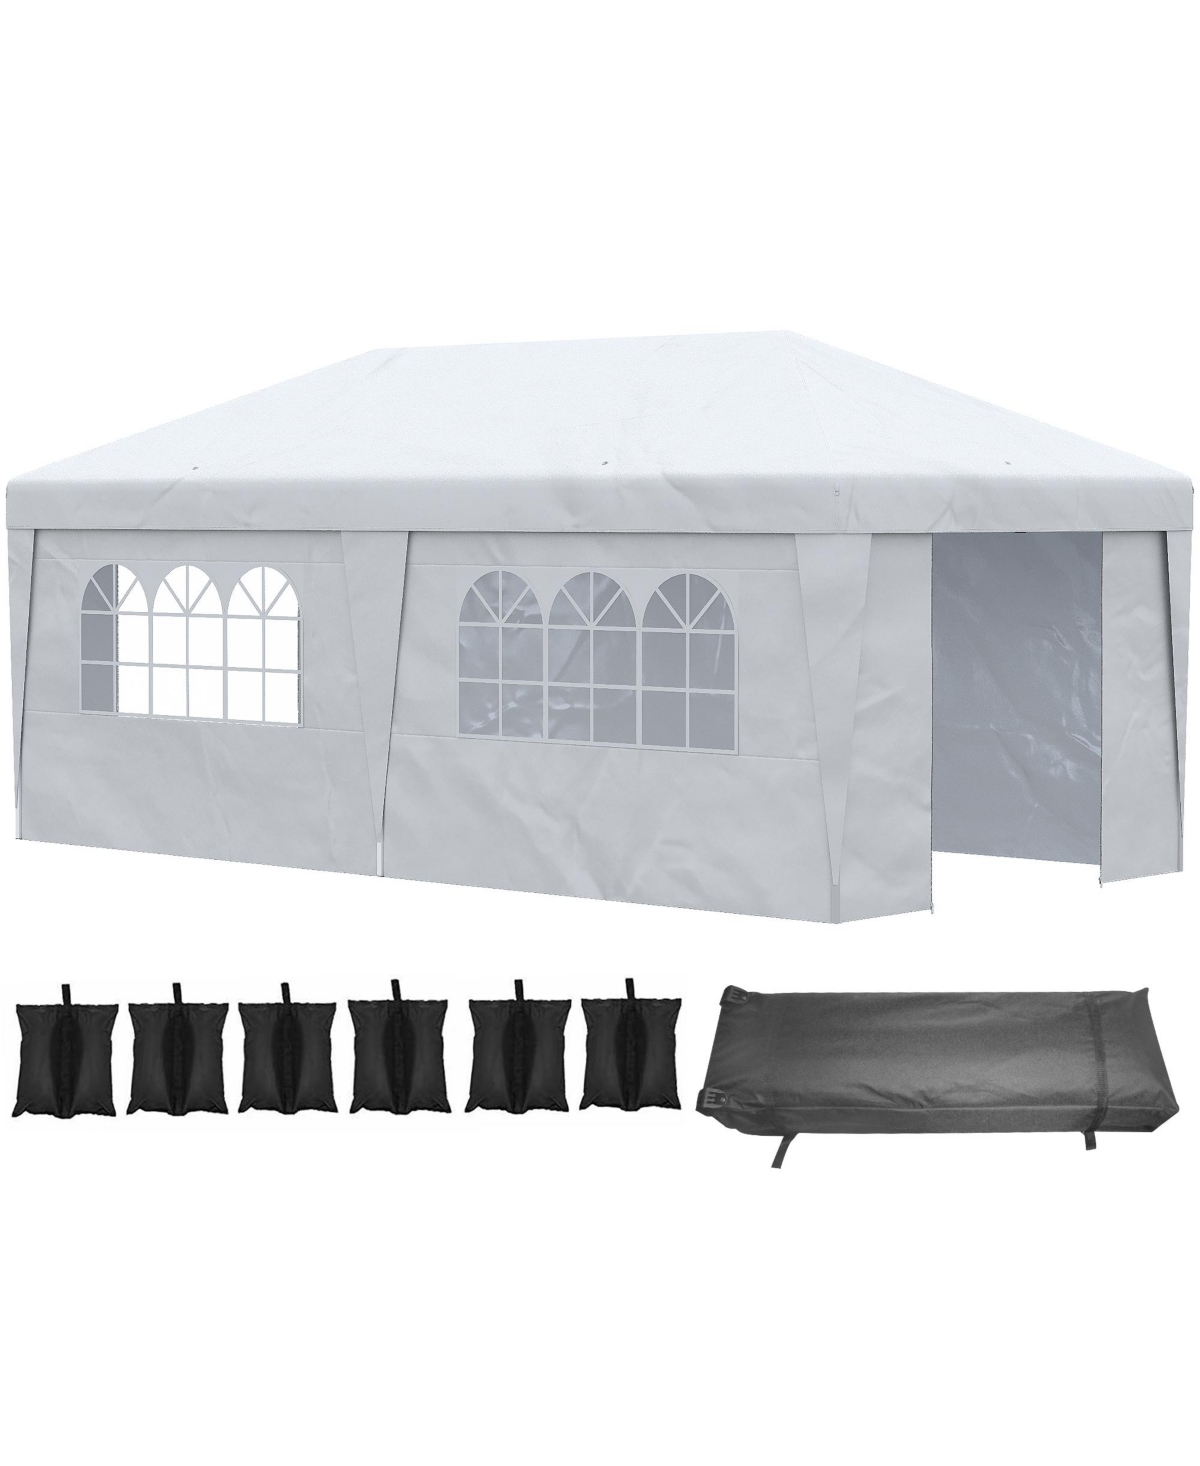 9.75' x 19.25' Pop Up Canopy Tent with Sidewalls, Height Adjustable Large Party Tent Event Shelter with Leg Weight Bags, Double Doors and Whe